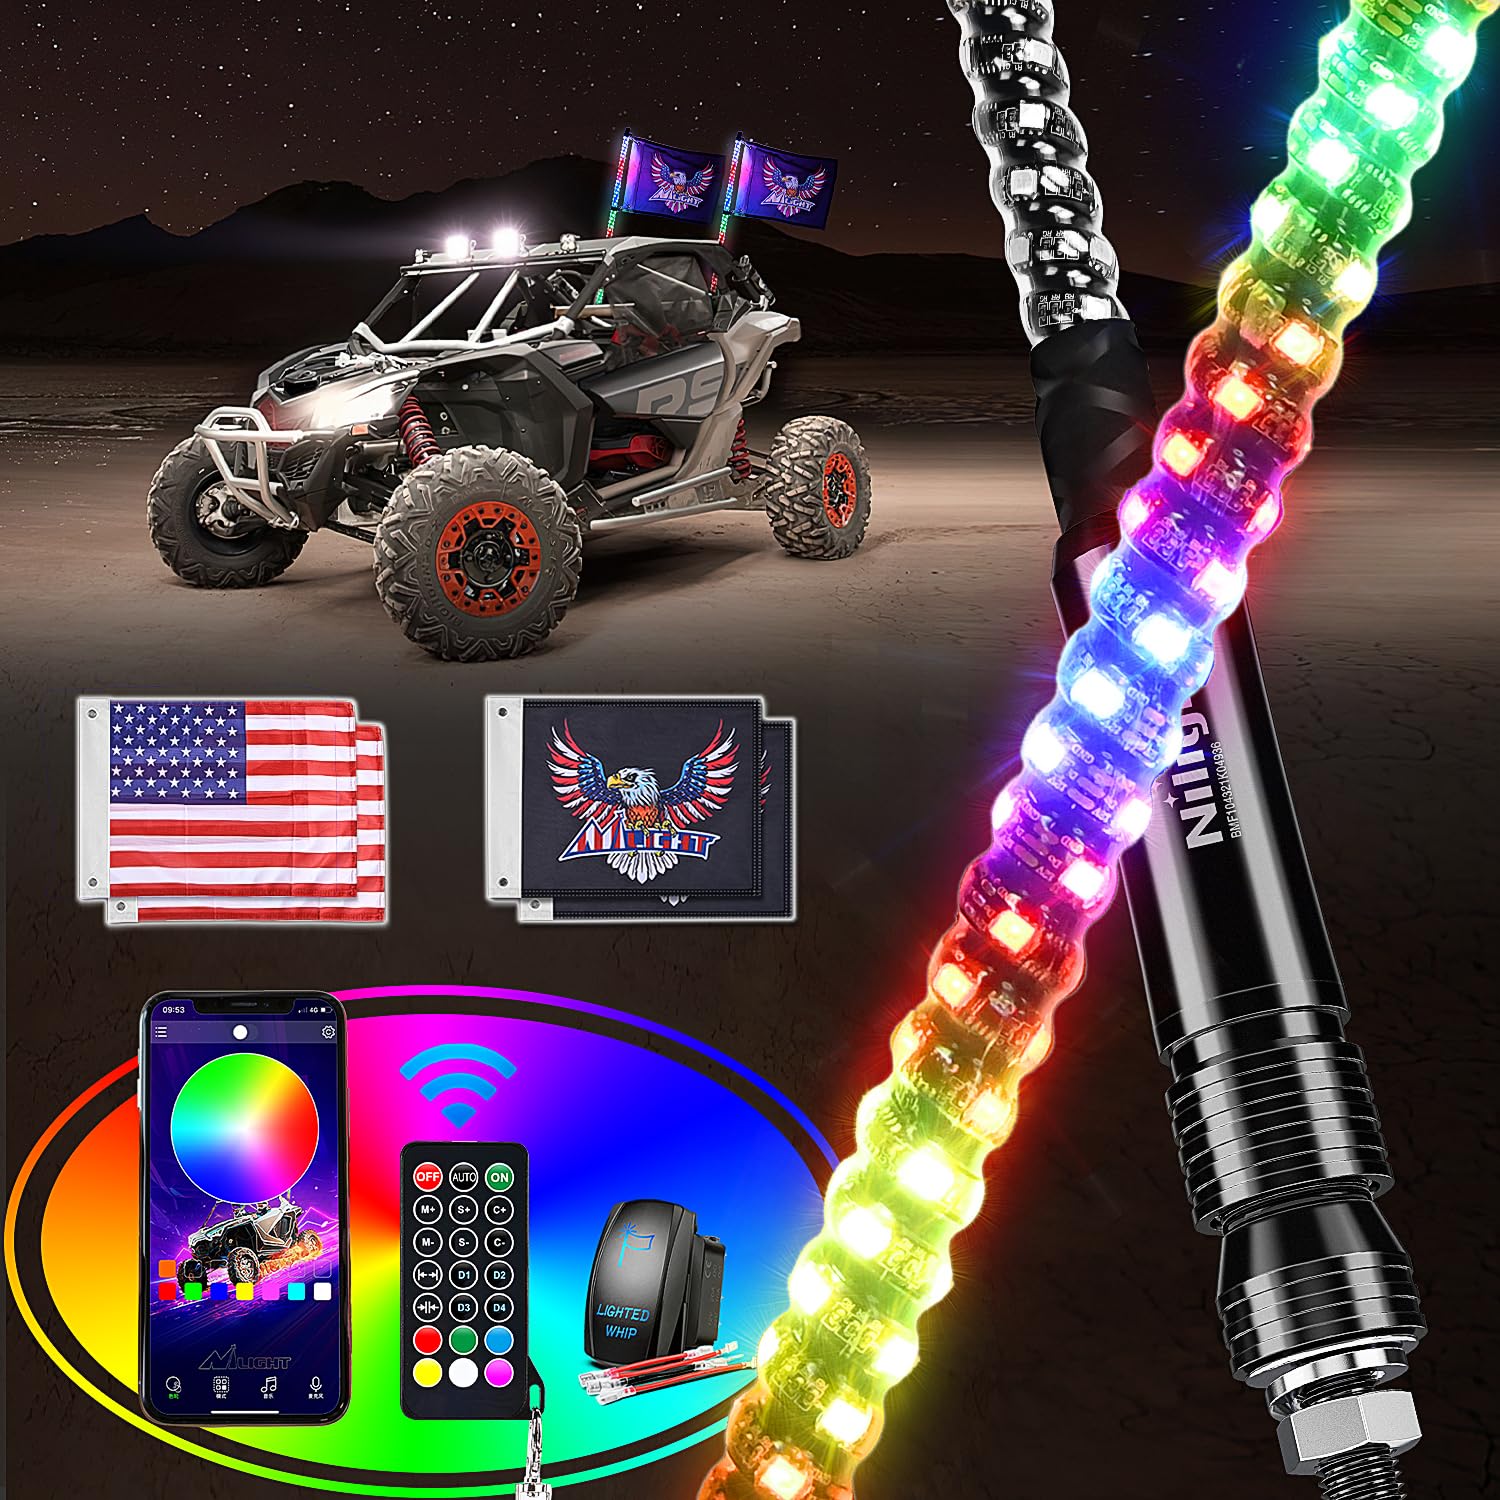 Nilight 2PCS 2FT RGB LED Whip Light with Extra Stop Turn Reverse Light, Remote & App Control, DIY Chasing Patterns, Safety Antenna Lighted Whips for ATV UTV Polaris RZR Can-am, 2 Year Warranty